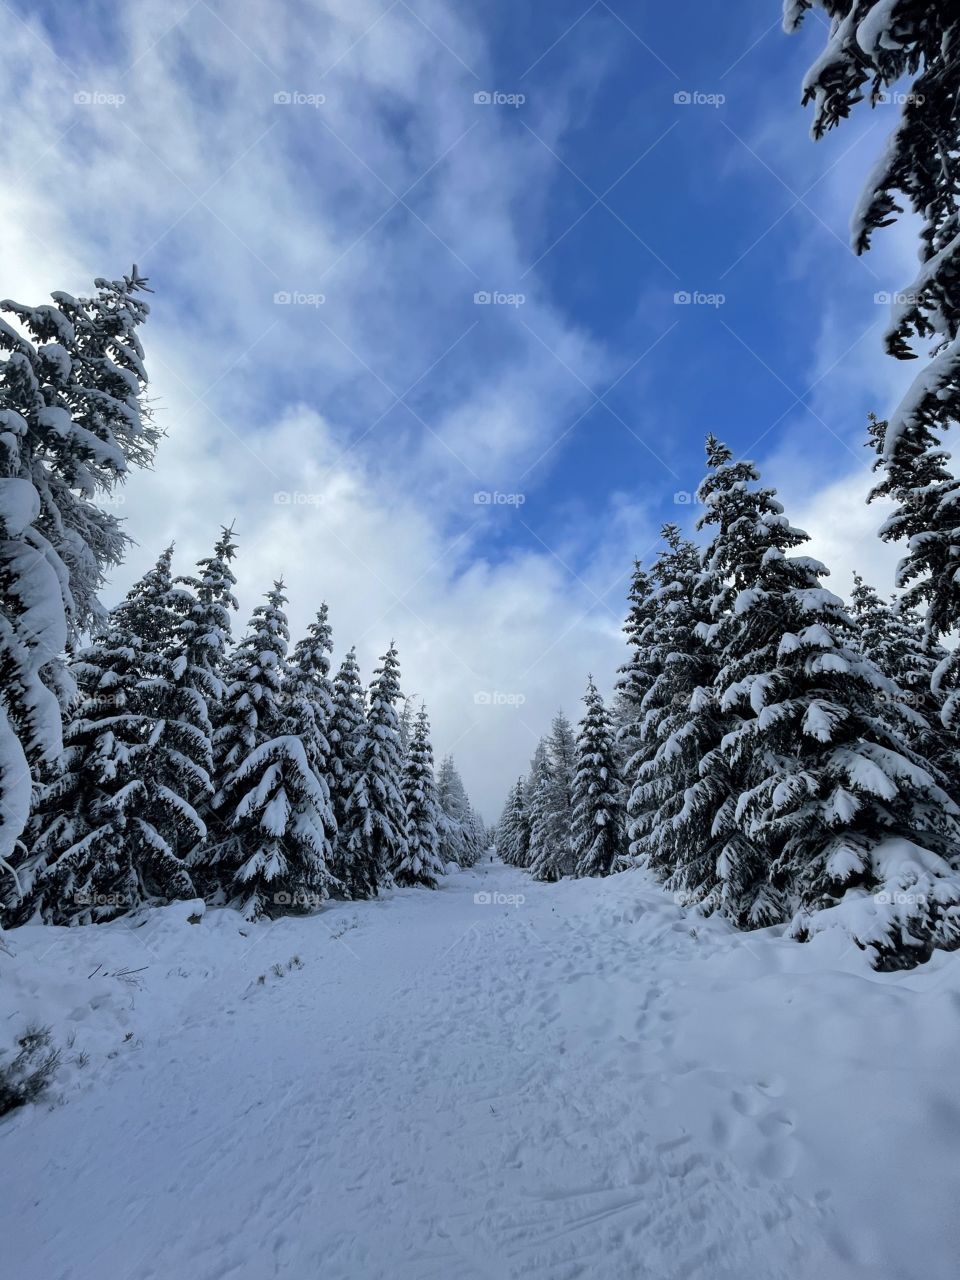 Snowy forest 